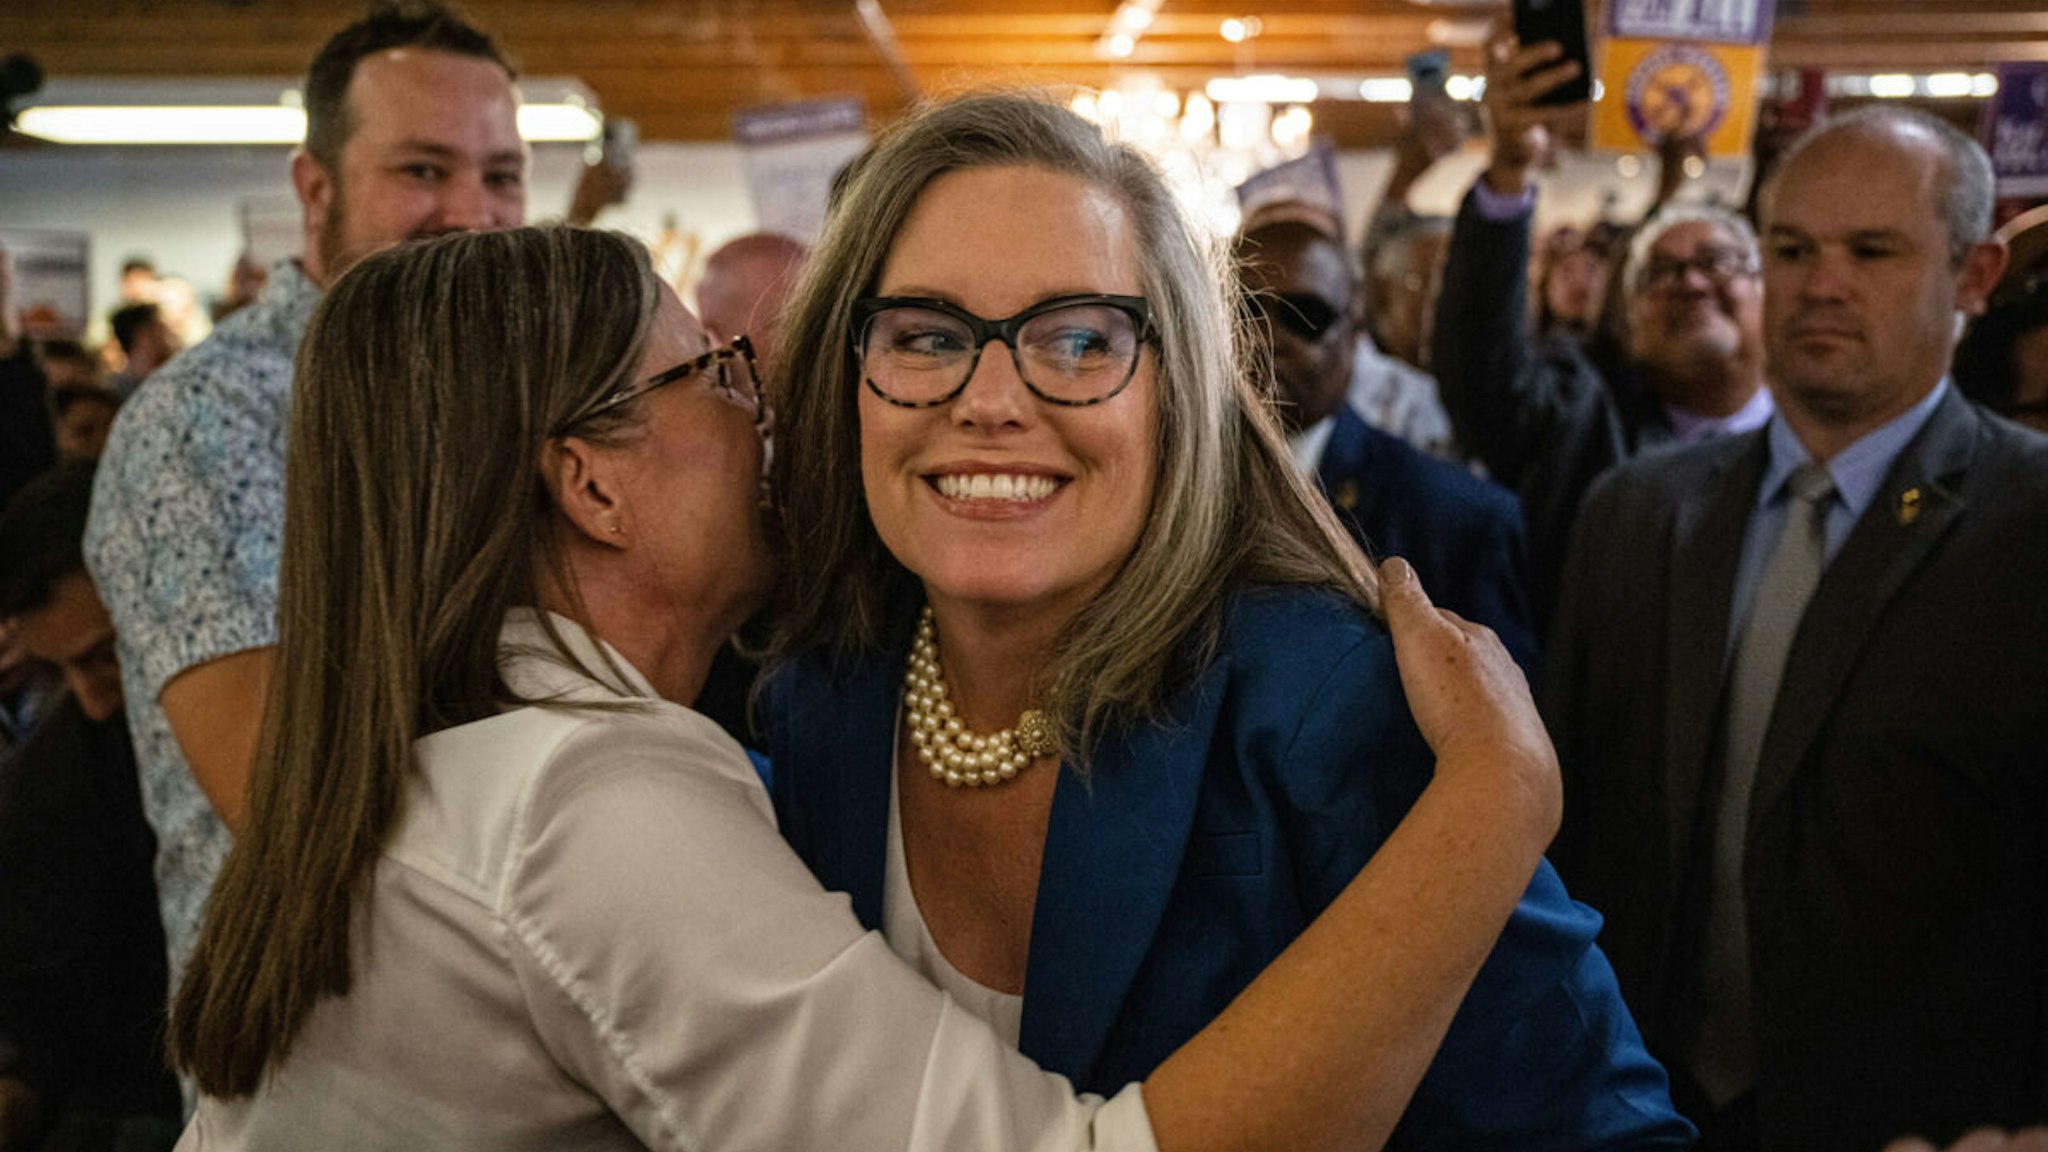 Governor-elect of Arizona Katie Hobbs hugs her twin sister, Becky Hobbs, at a rally to celebrate Hobbs' victory for Governor of Arizona on November 15, 2022 in Phoenix, Arizona. Major news organizations announced her win over Trump endorsed republican candidate for governor Kari Lake